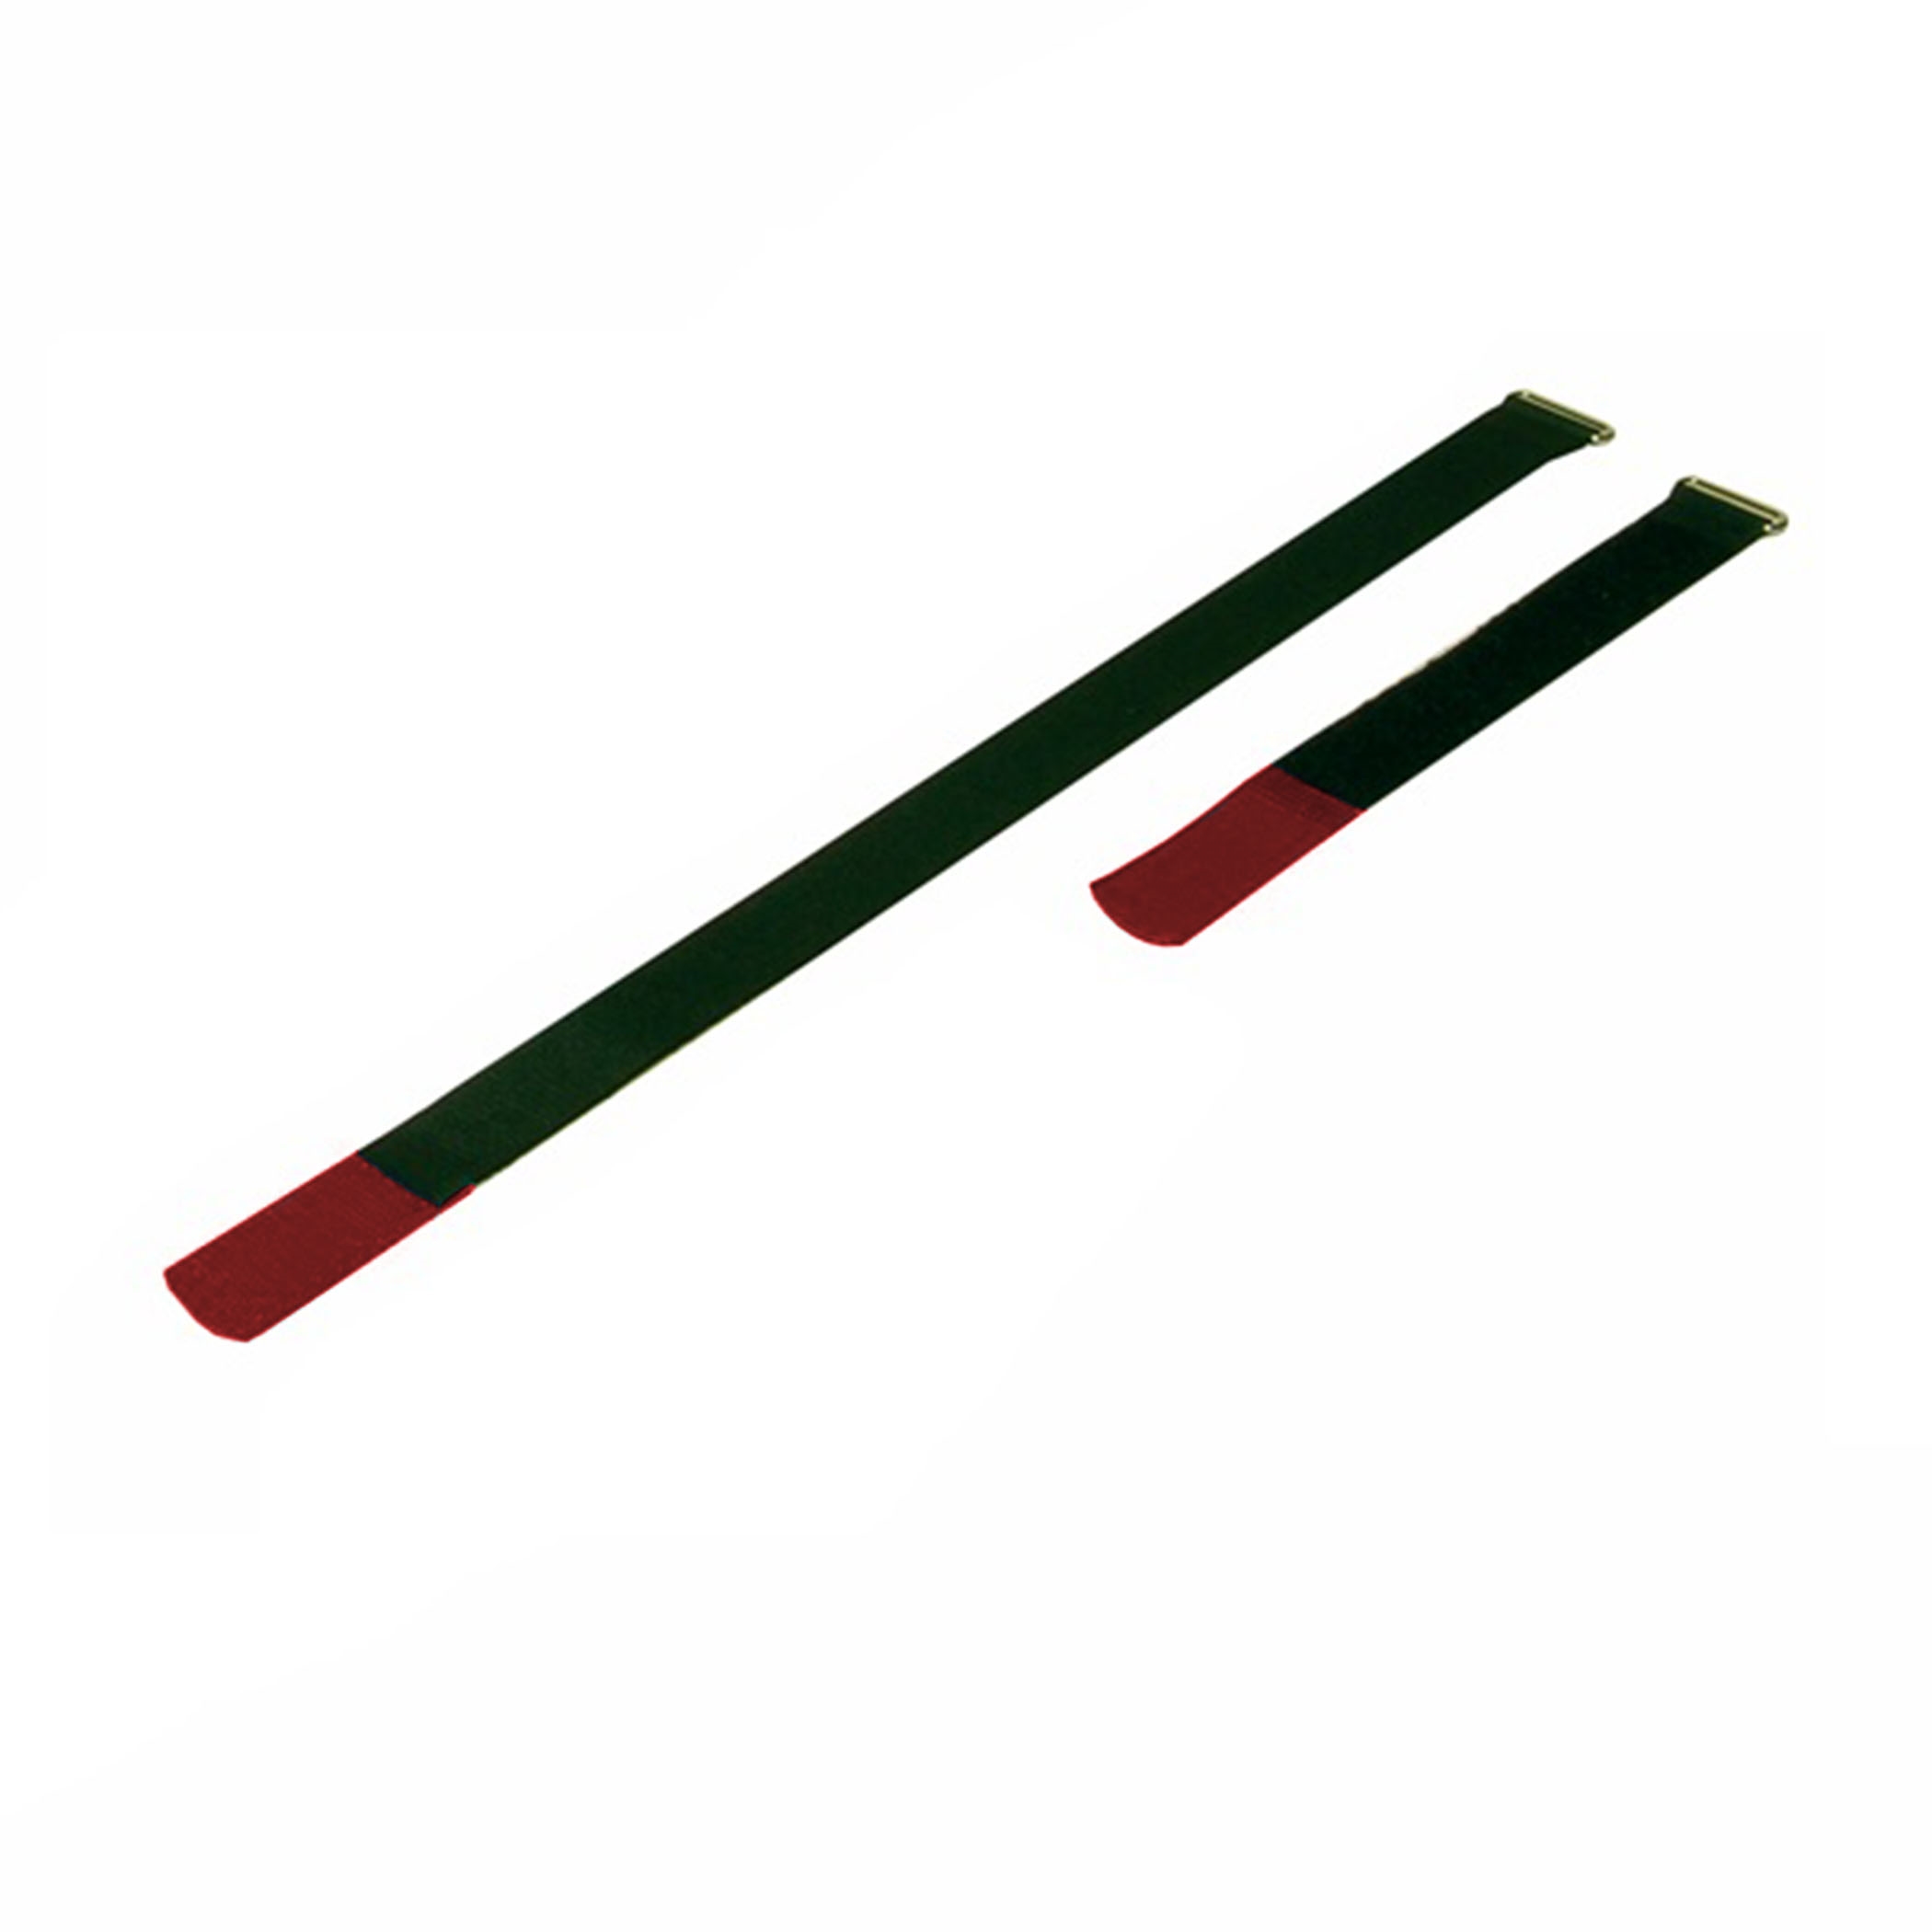 Cable Tie 220x25mm with Hook Red, (10 pieces) - a2522-600h